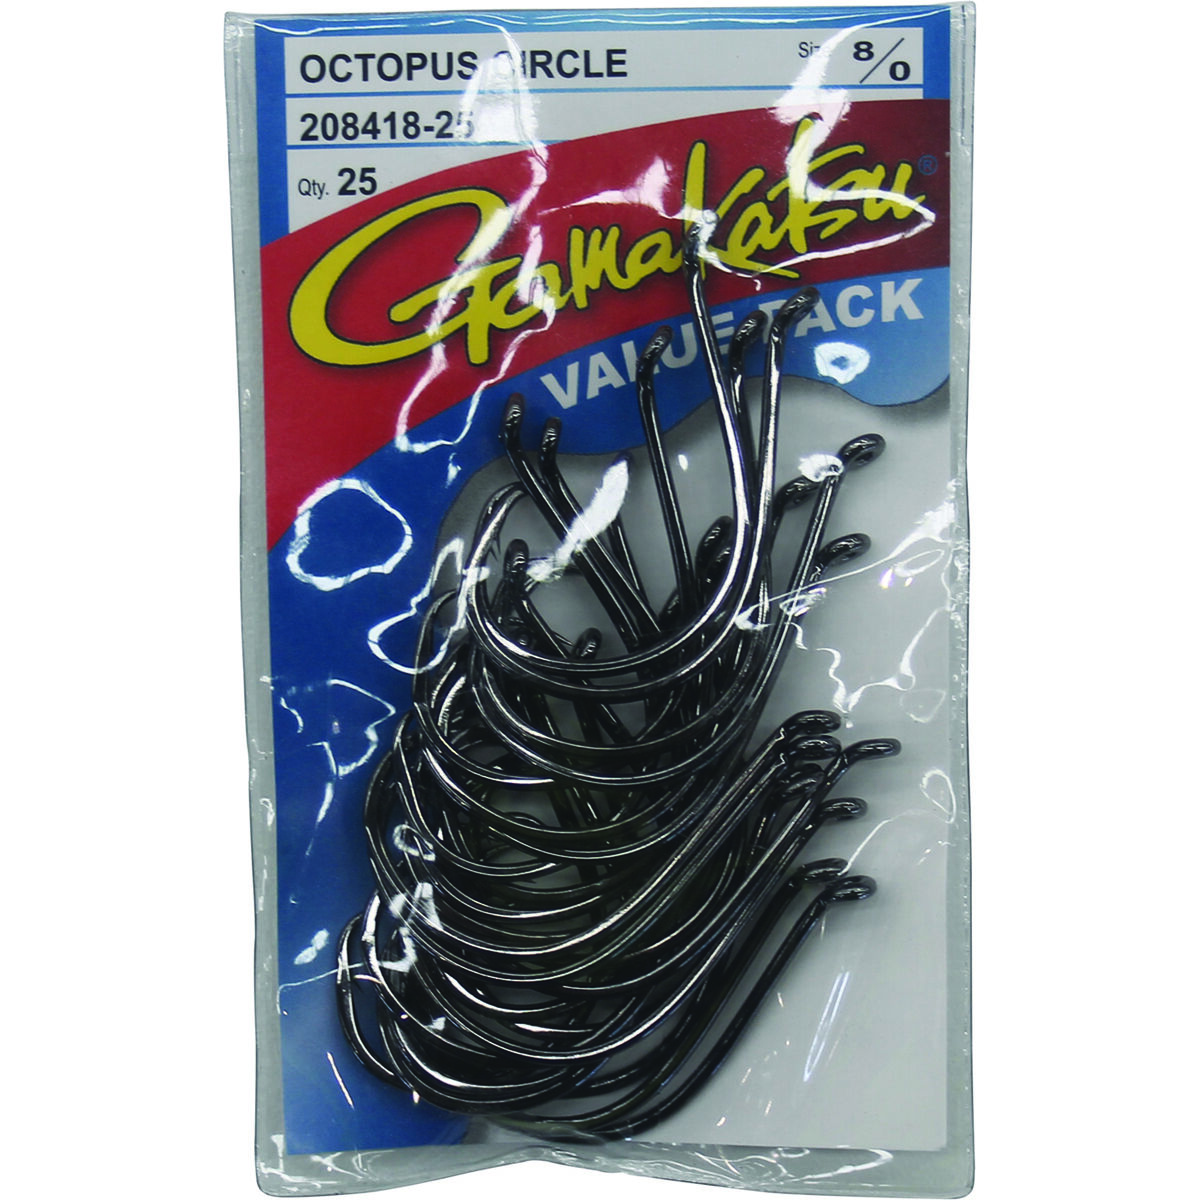 Croch 150 Pack Octopus Circle Hooks 6 Size #1, 1/0, 2/0, 3/0, 4/0, 5